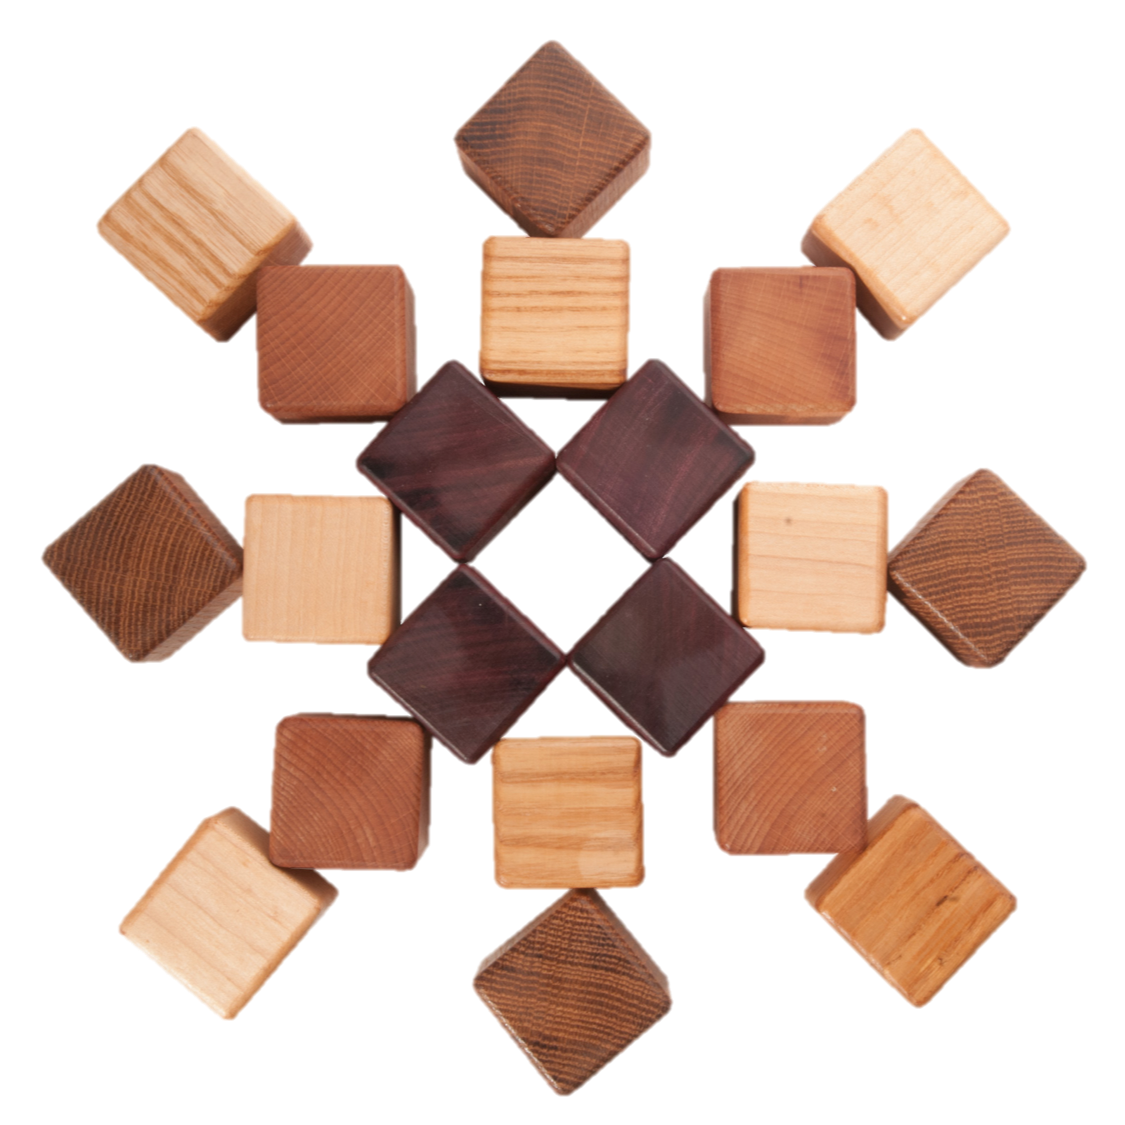 Classic Wooden Blocks for toddlers from 5 types of wood, 20- pieces